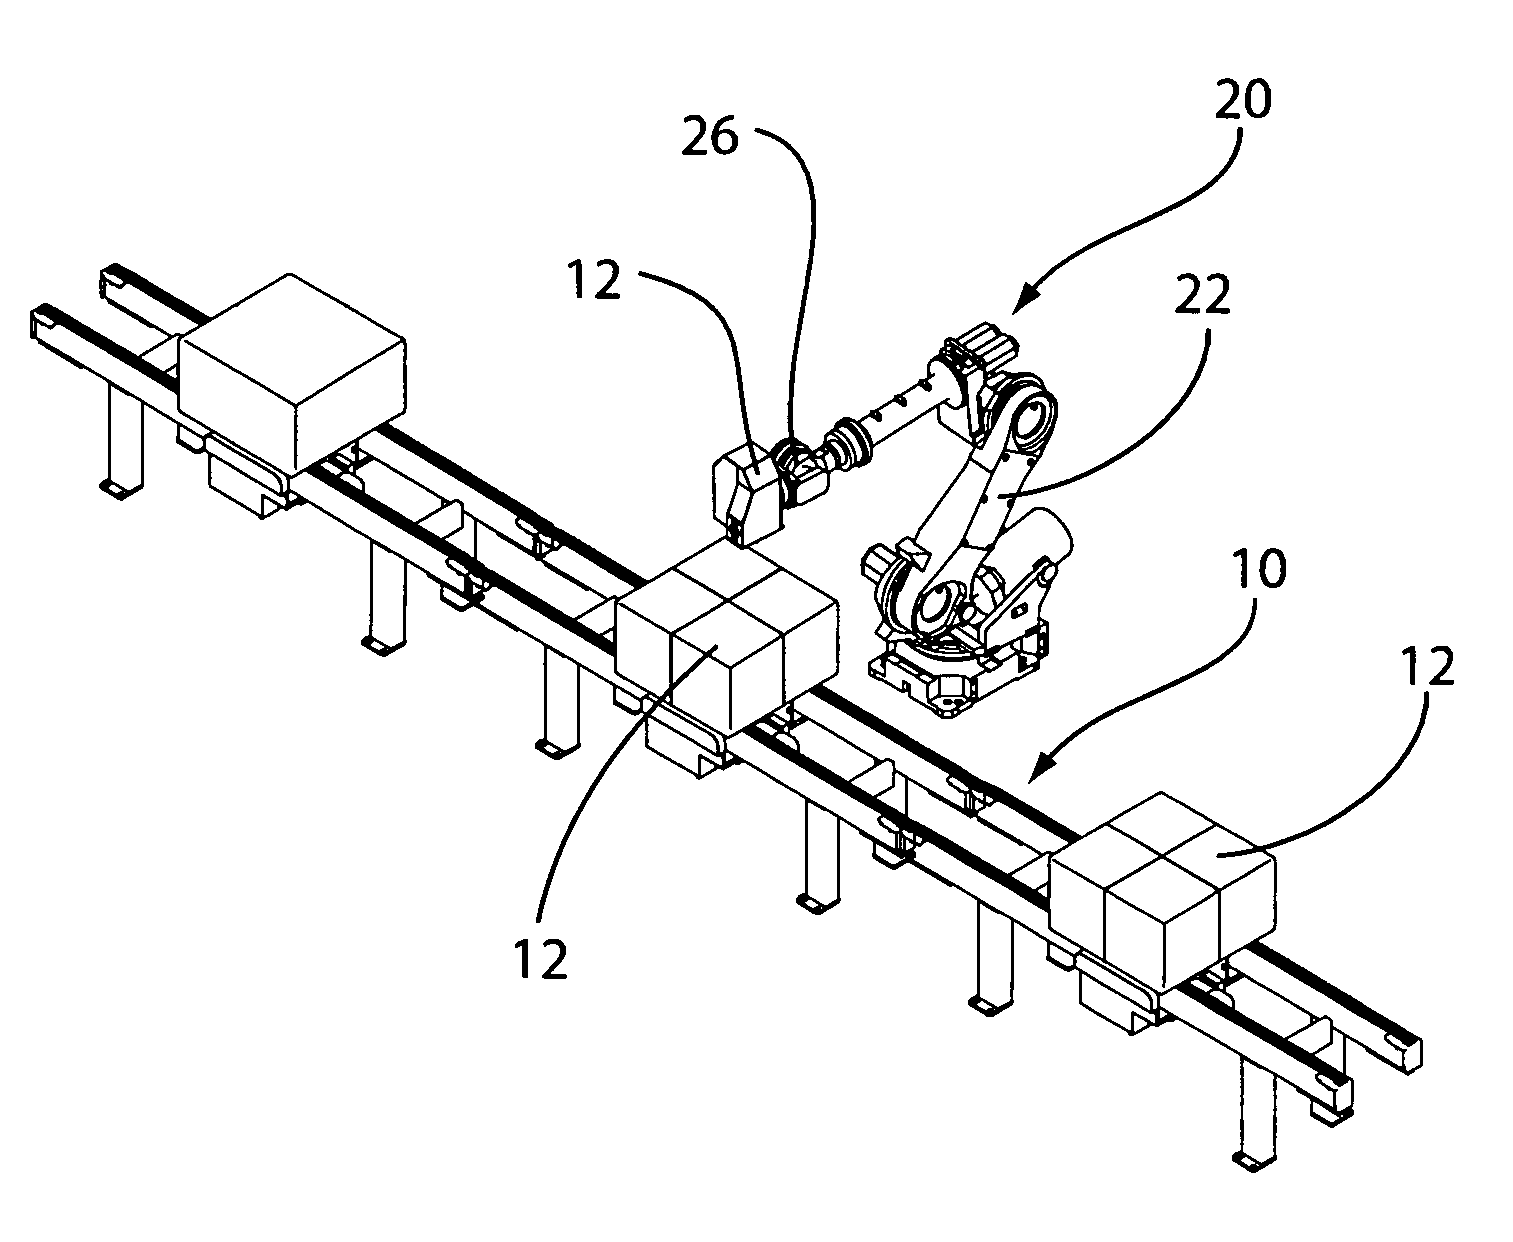 Method and apparatus for removing wires from a bale